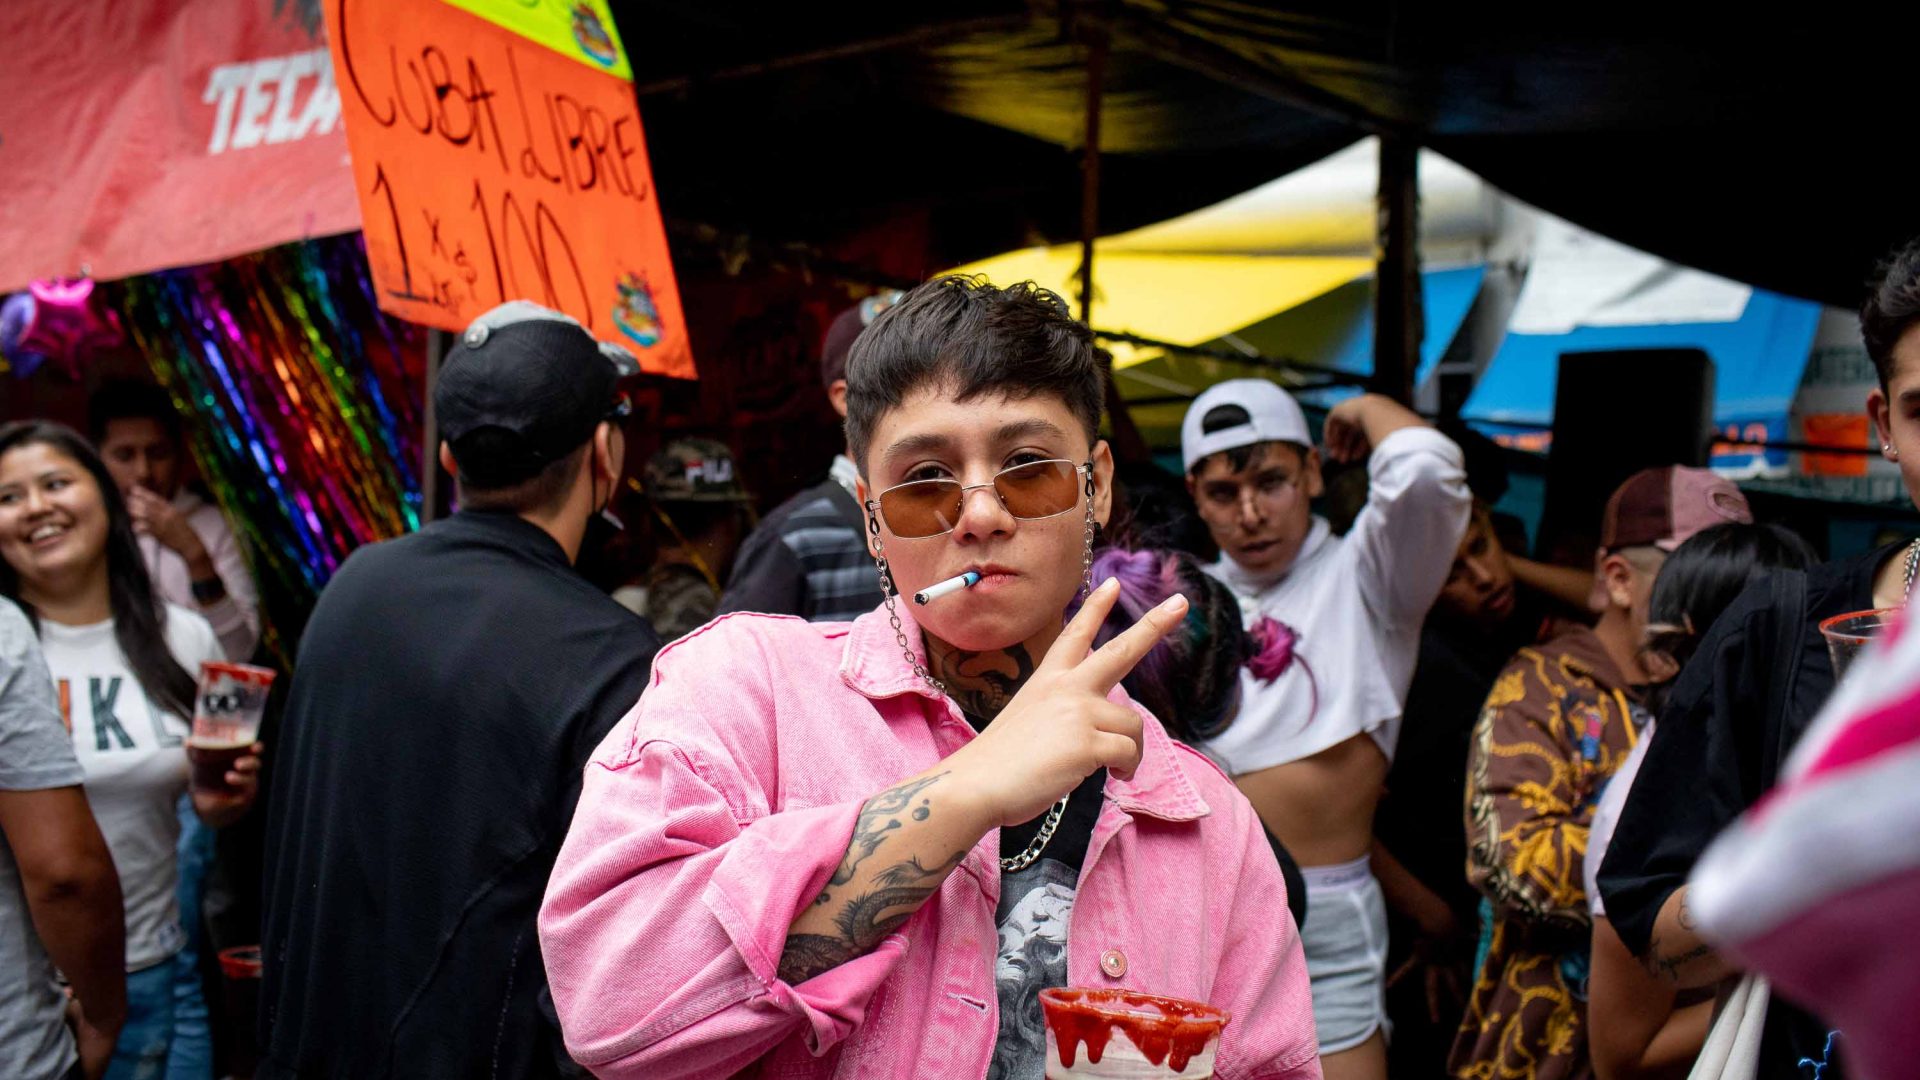 A man poses for a photo, michelada in hand. He is wearing sunglasses and smoking a cigarette.